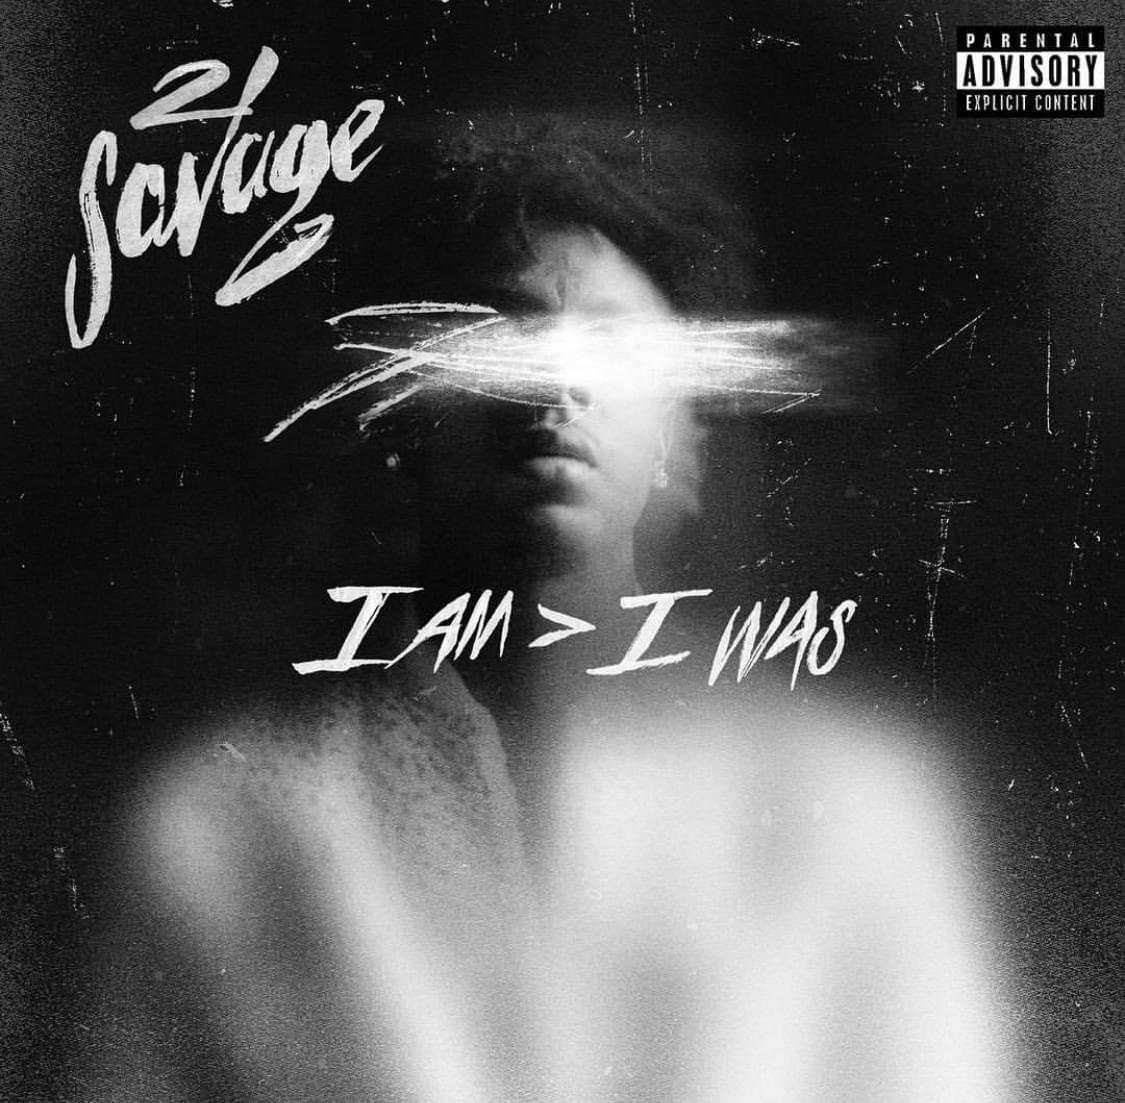 21 Savage Releases “I Am > I Was” featuring Post Malone, J.Cole, Offset & More [STREAM]